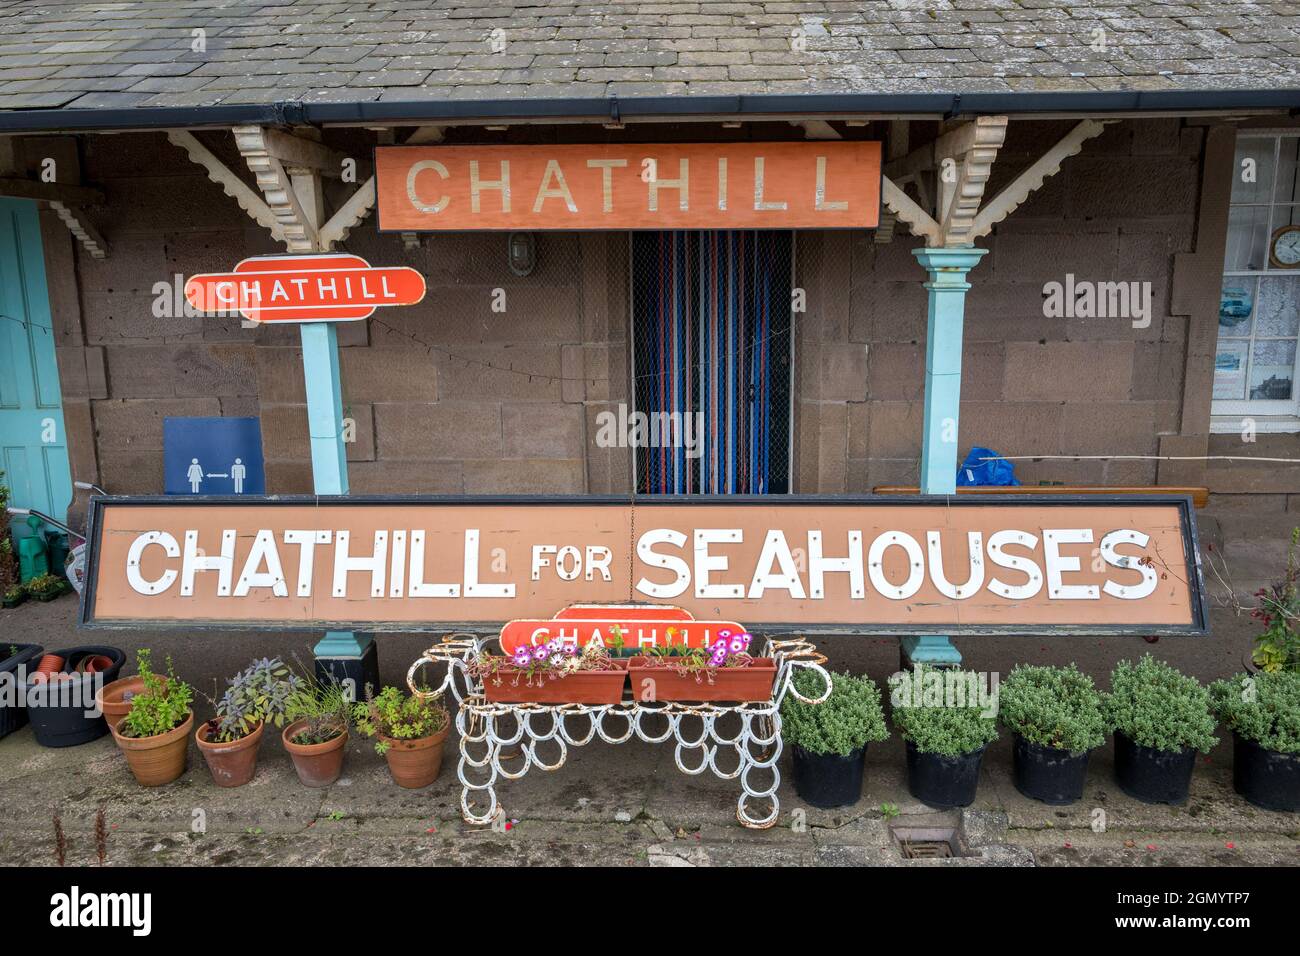 Grade 2 listed Chathill railway station on the east coast mainline. Stock Photo